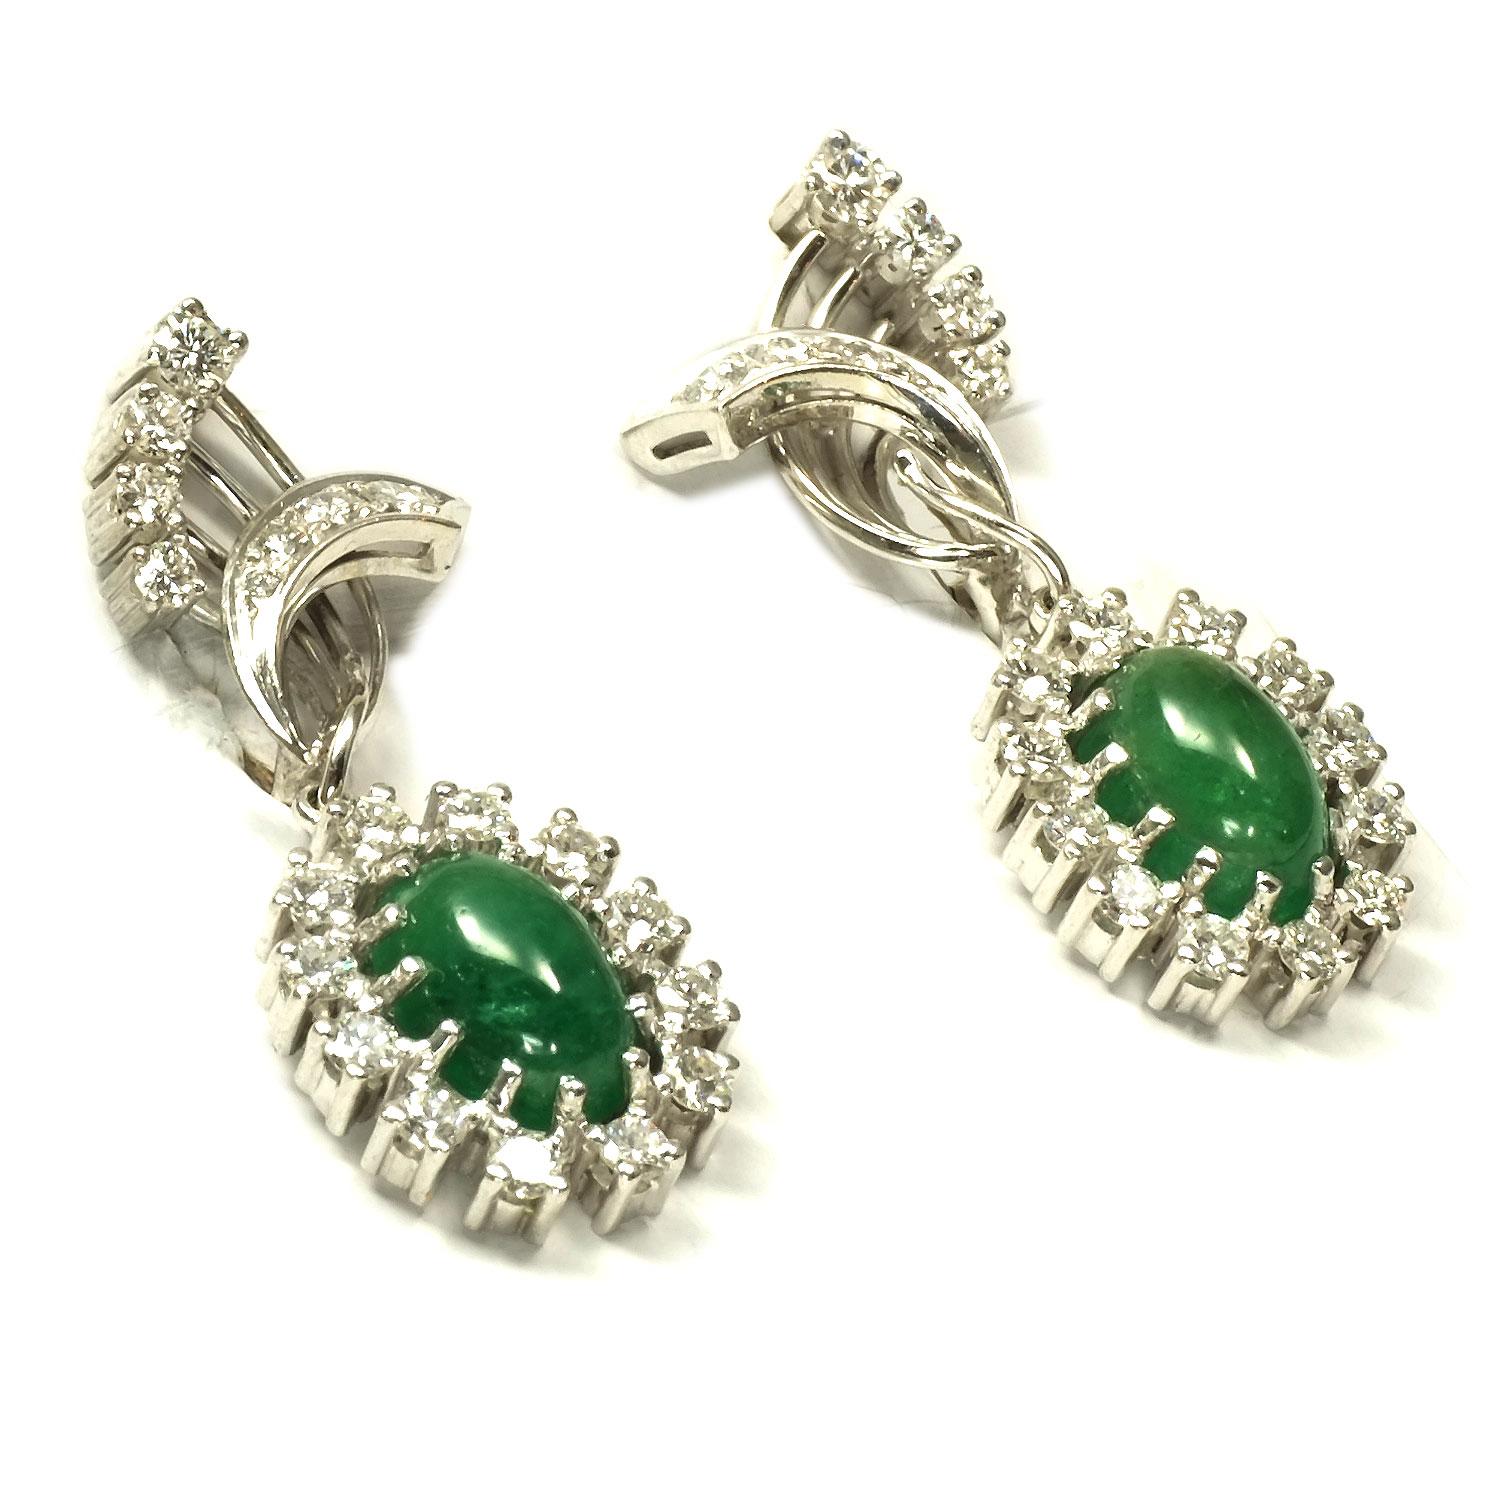 Emerald Cabochon and 2.6 Carat Diamond Clip On Drop Earrings in 18K White Gold

Classically elegant clip-on earrings in a stylized leaf shape each set with 9 brilliant-cut diamonds, underneath each an oval emerald cabochon mounted in an entourage of